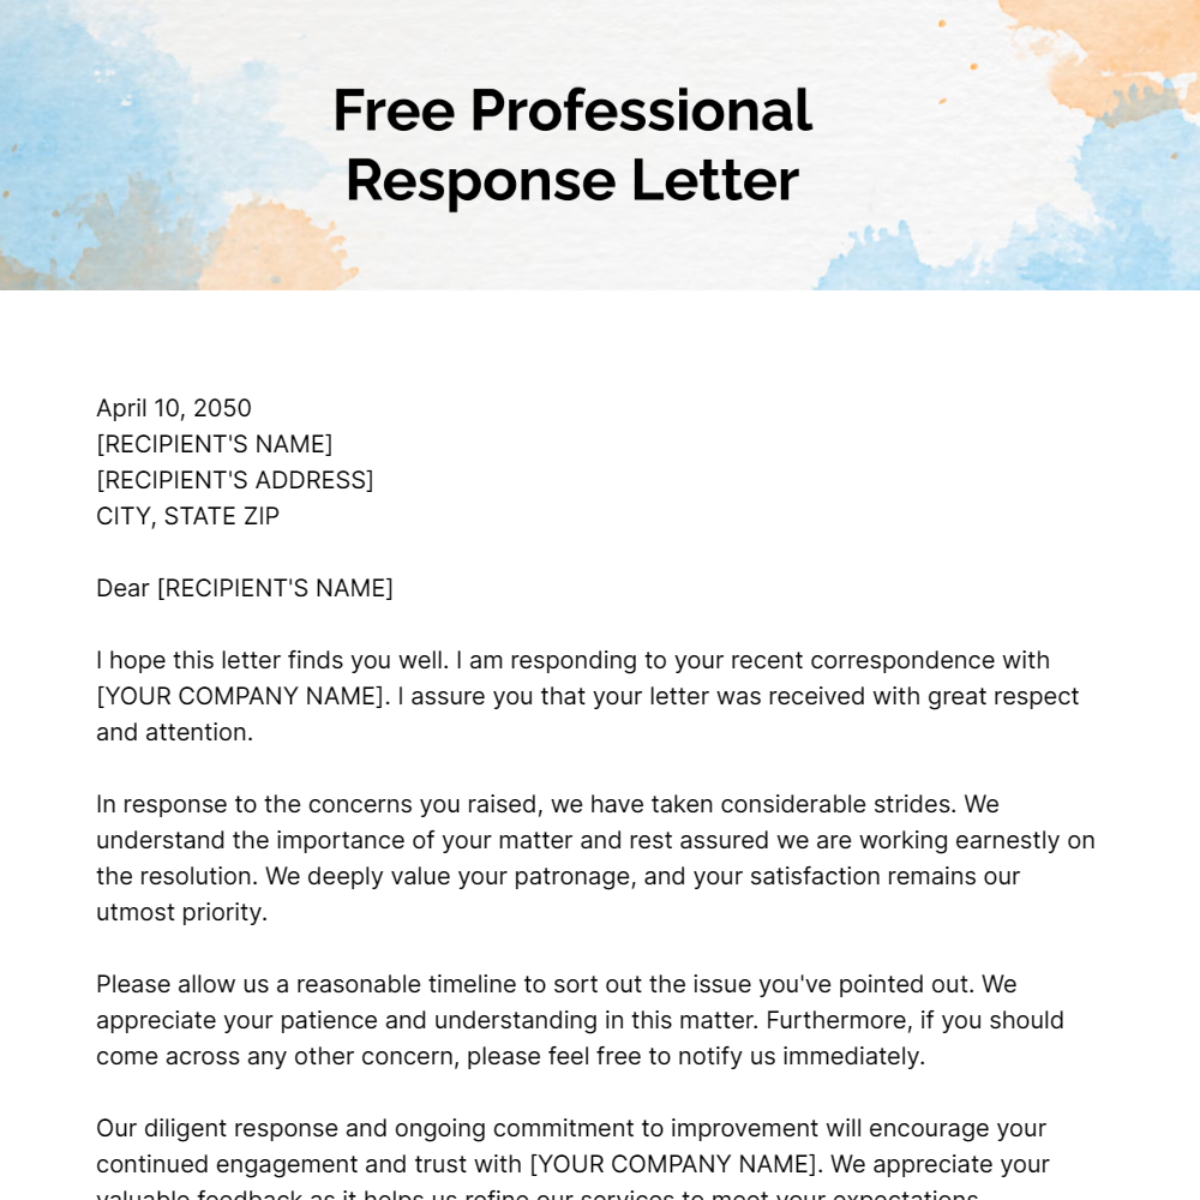 Free Professional Response Letter